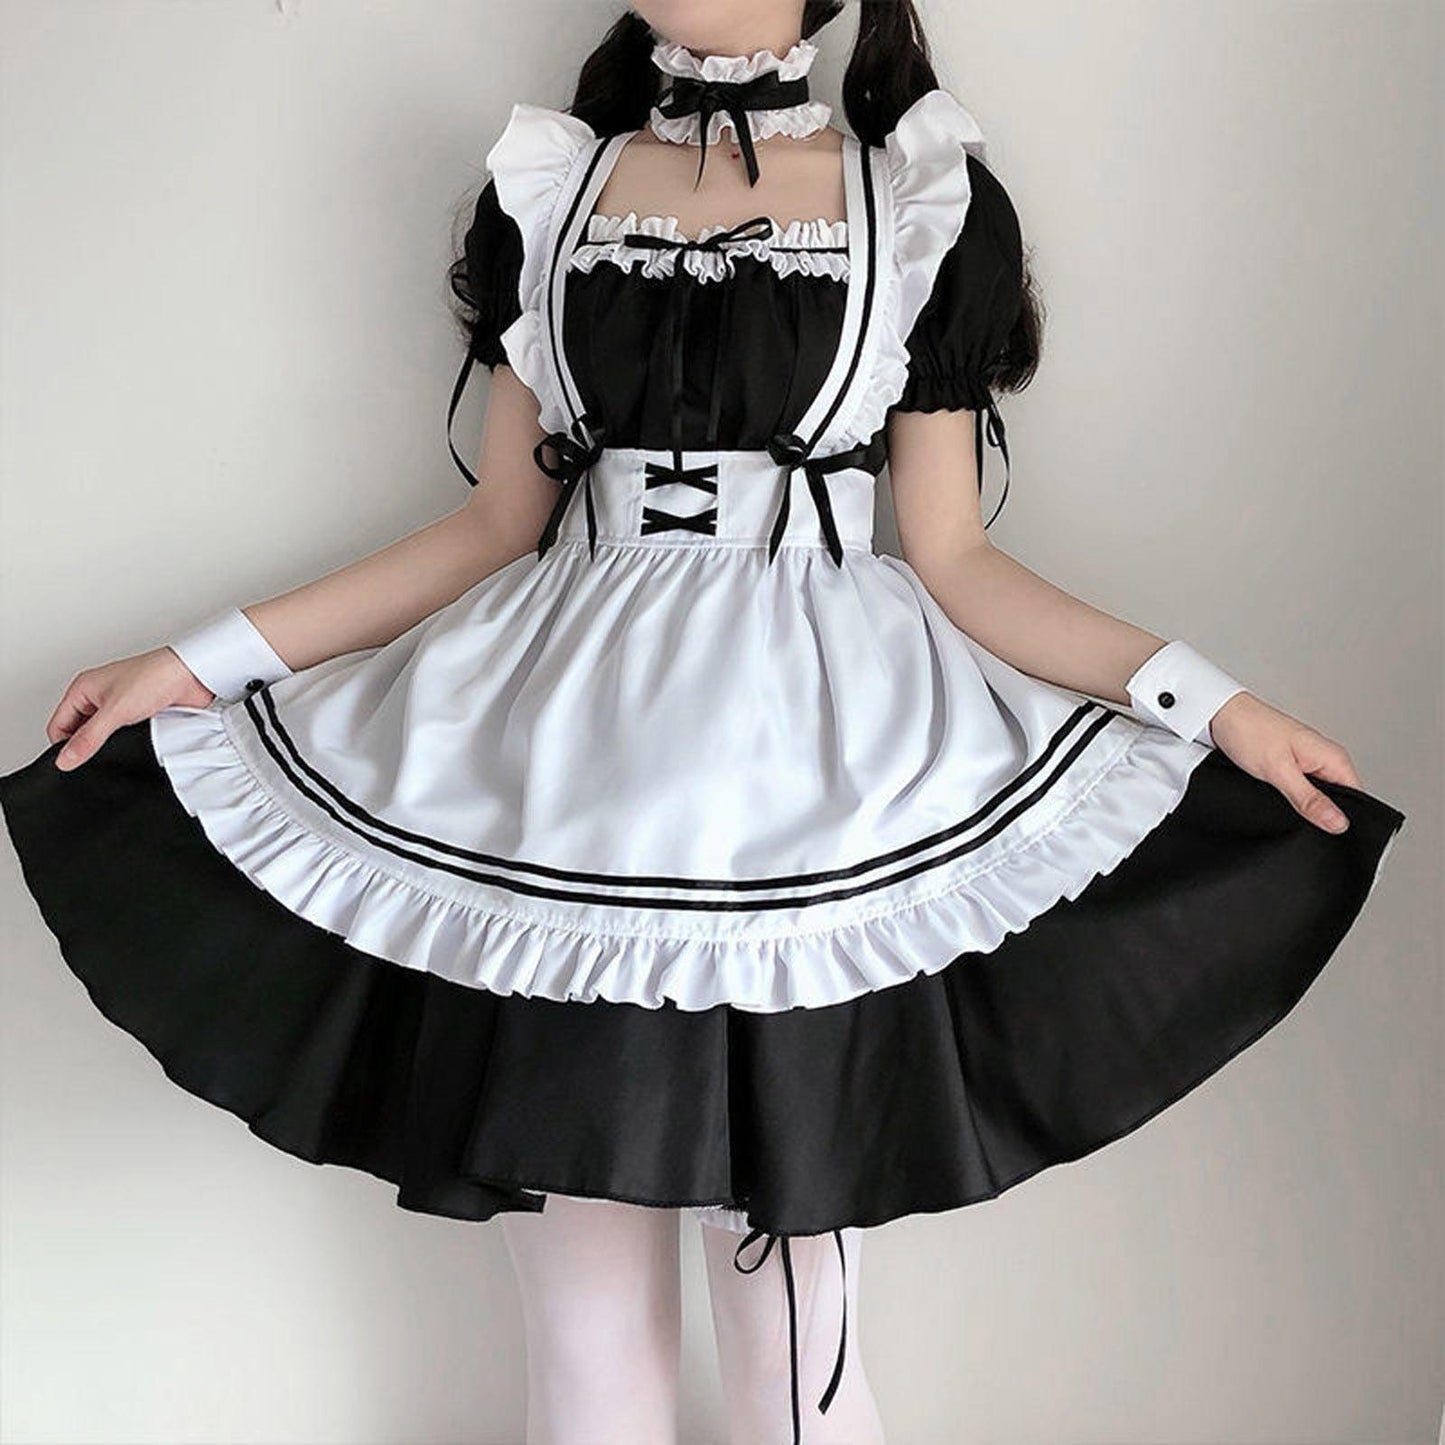 Maid Outfit - Black / S Costume - Femboy Fatale